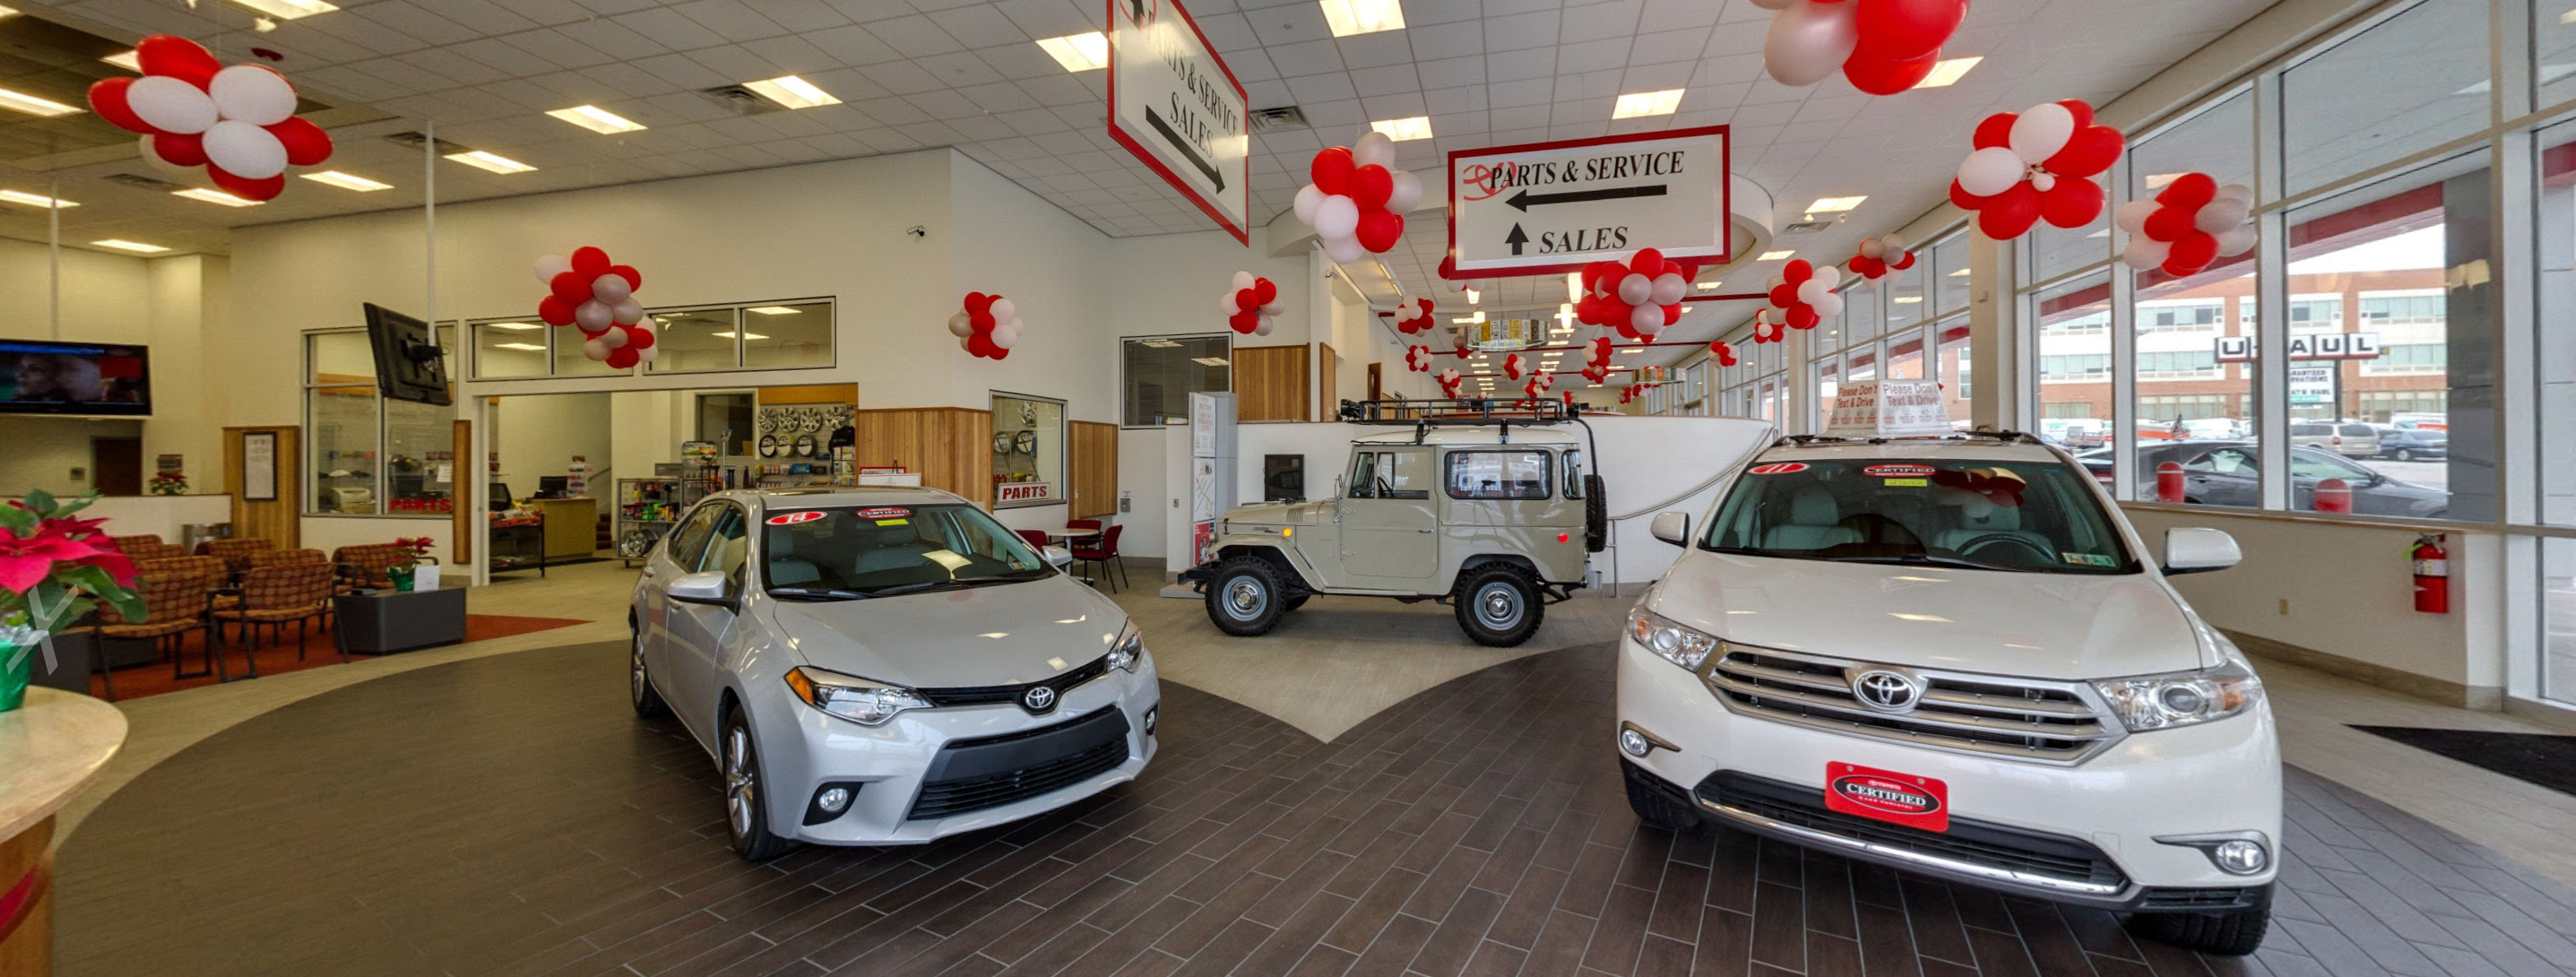 Central City Toyota History